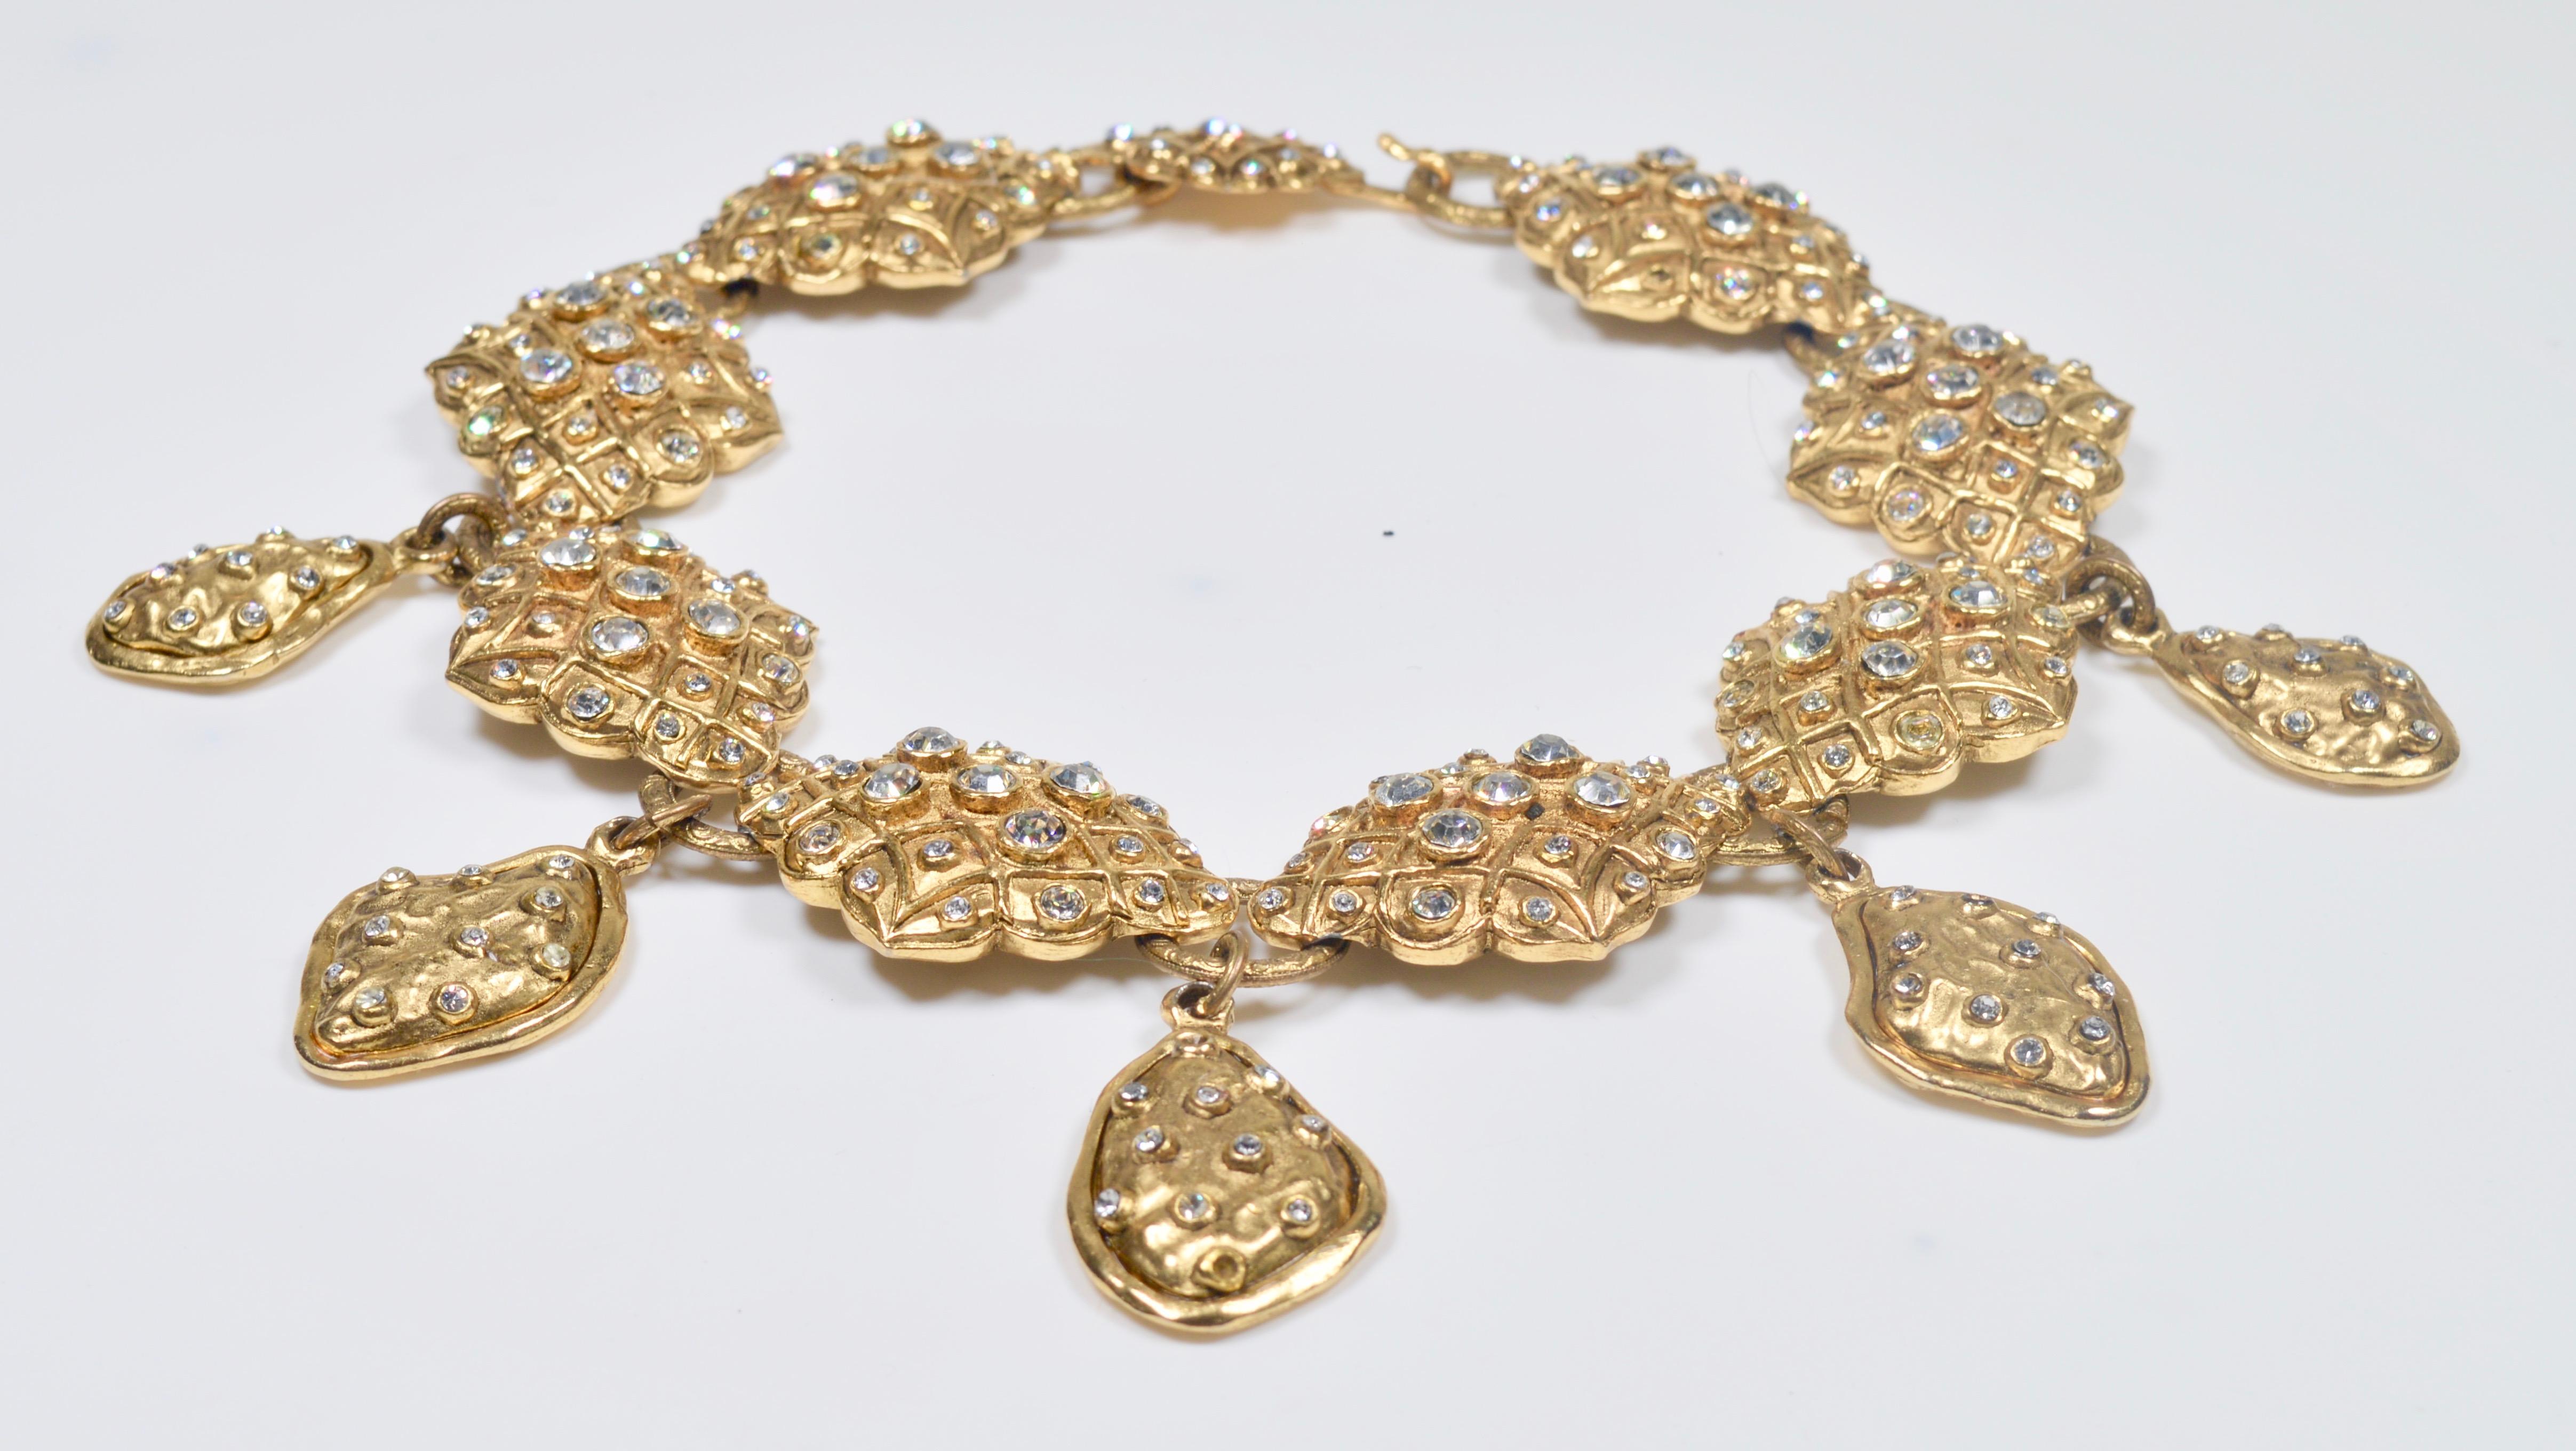 A beautiful collar necklace with one of the marks used by the House of Chanel in the 1970s and into the early 1980s.
The necklace appears to have never been worn but 6 fo the smaller rhinestones are missing.
The main links  measure 5 cm x 3.5 cm
